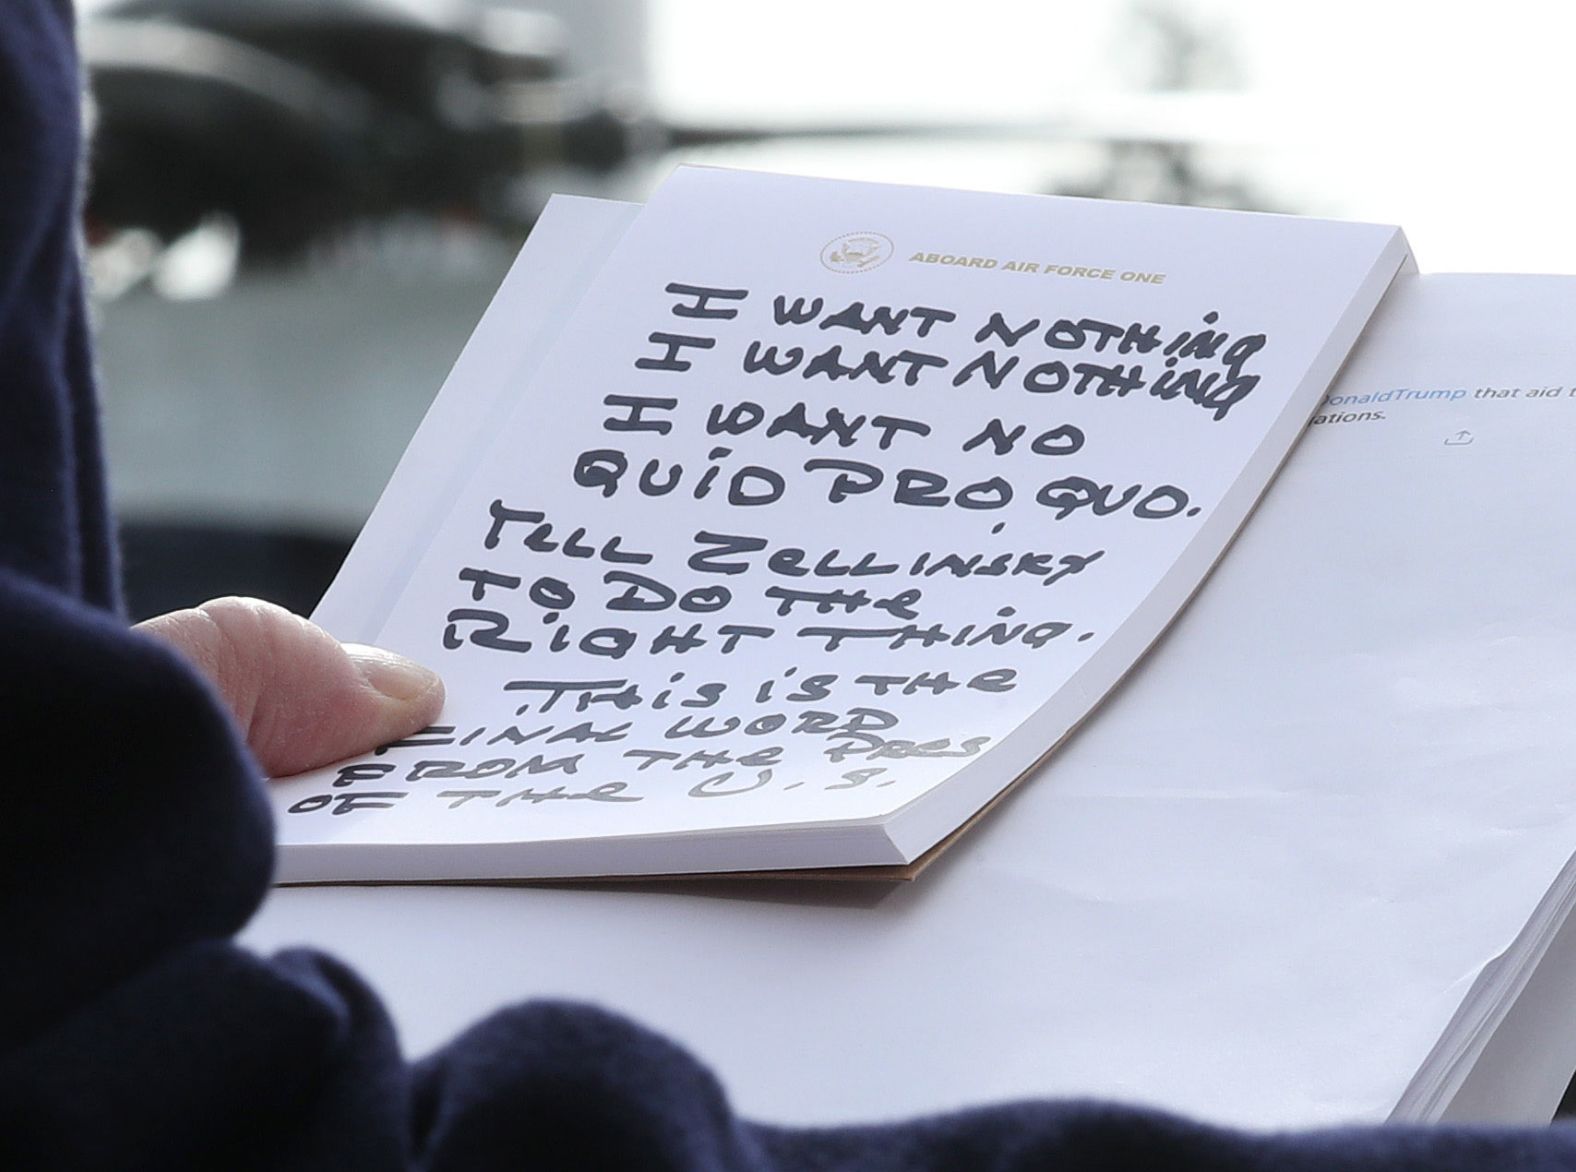 President Trump holds his notes while speaking to the media on November 20. Trump repeatedly said he told Sondland over the phone that he wanted "nothing" on Ukraine. "I say to the Ambassador in response: I want nothing, I want nothing. I want no quid pro quo," Trump said, reading from notes that appeared to be written in Sharpie. "Tell Zelensky, President Zelensky, to do the right thing."